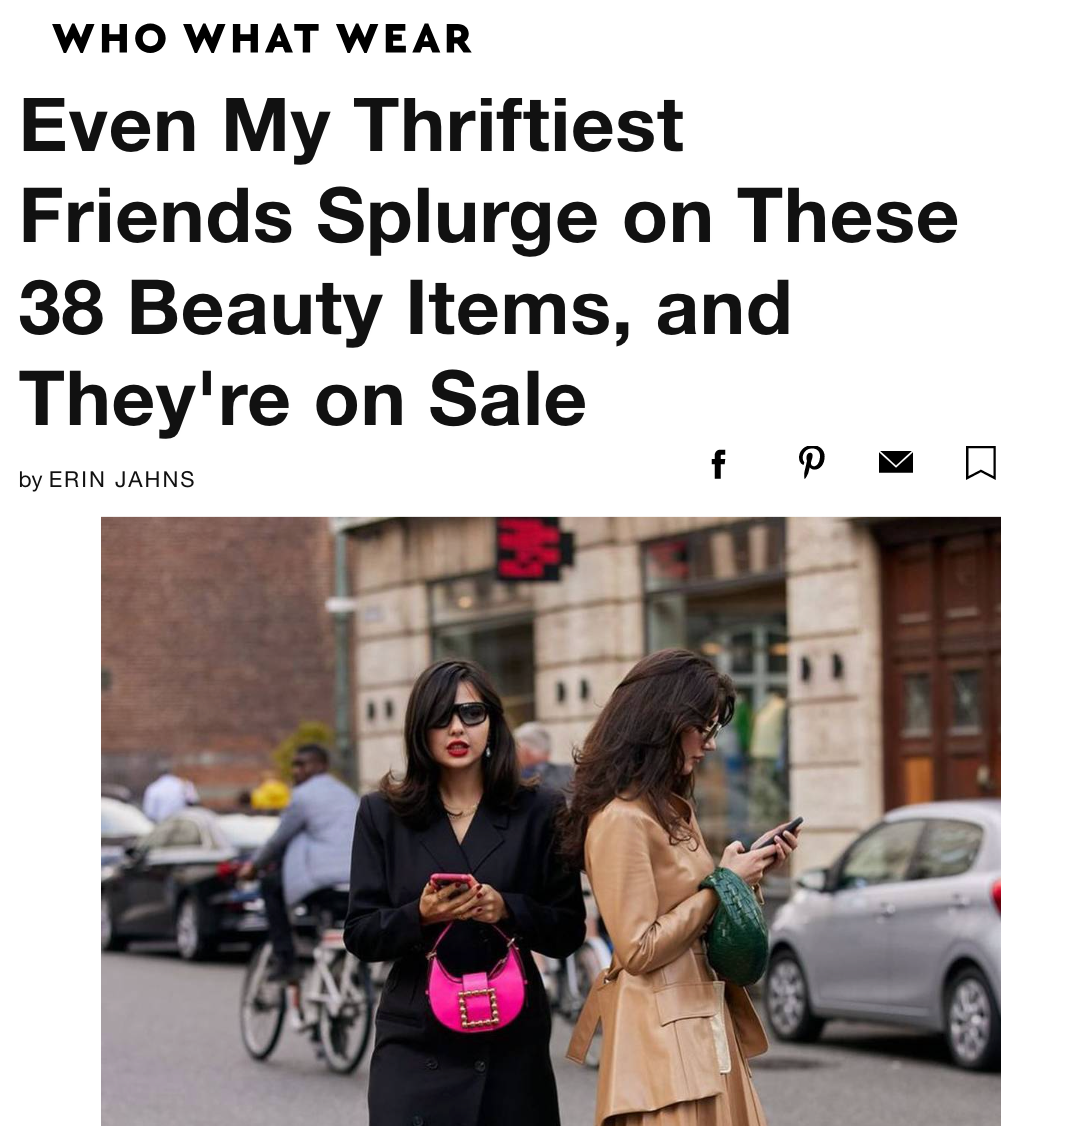 Who What Wear: Even My Thriftiest Friends Splurge on These 38 Beauty Items, and They're on Sale